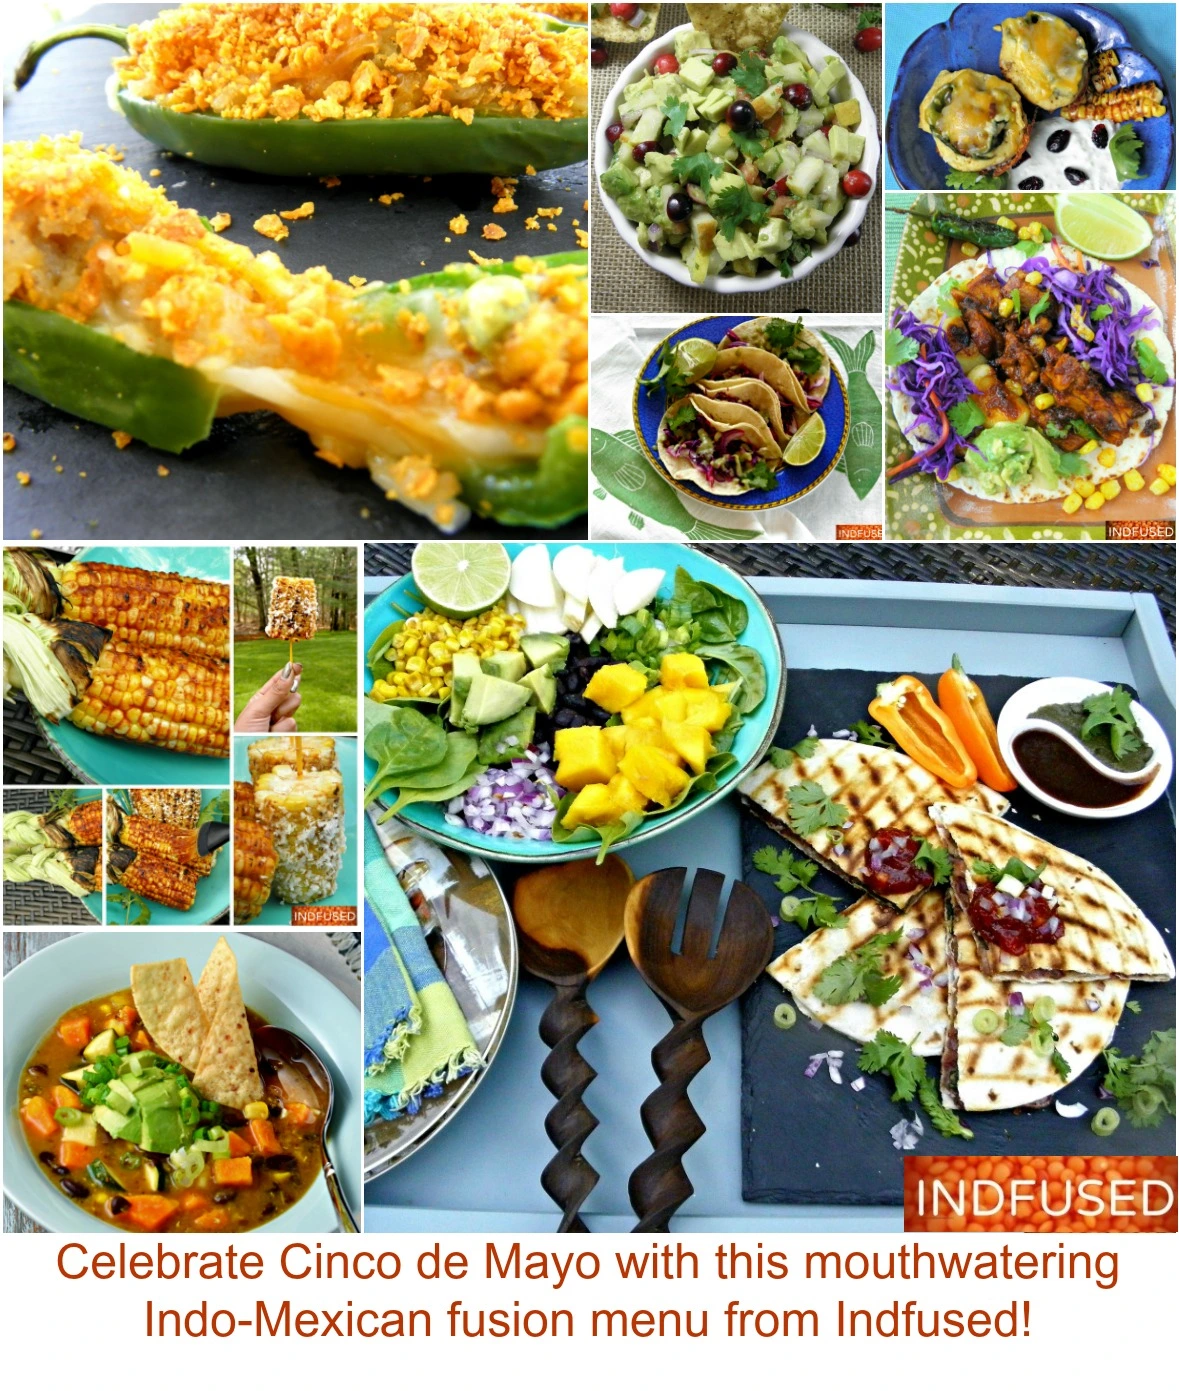 Delicious Indian and Mexican fusion recipes Delicious Indian and Mexican fusion recipes that are easier, healthier and made from local ingredients. Check out the samosadillas, chicken tandoori tacos, stuffed jalapenos, avocado relish and so much more. Serves 4